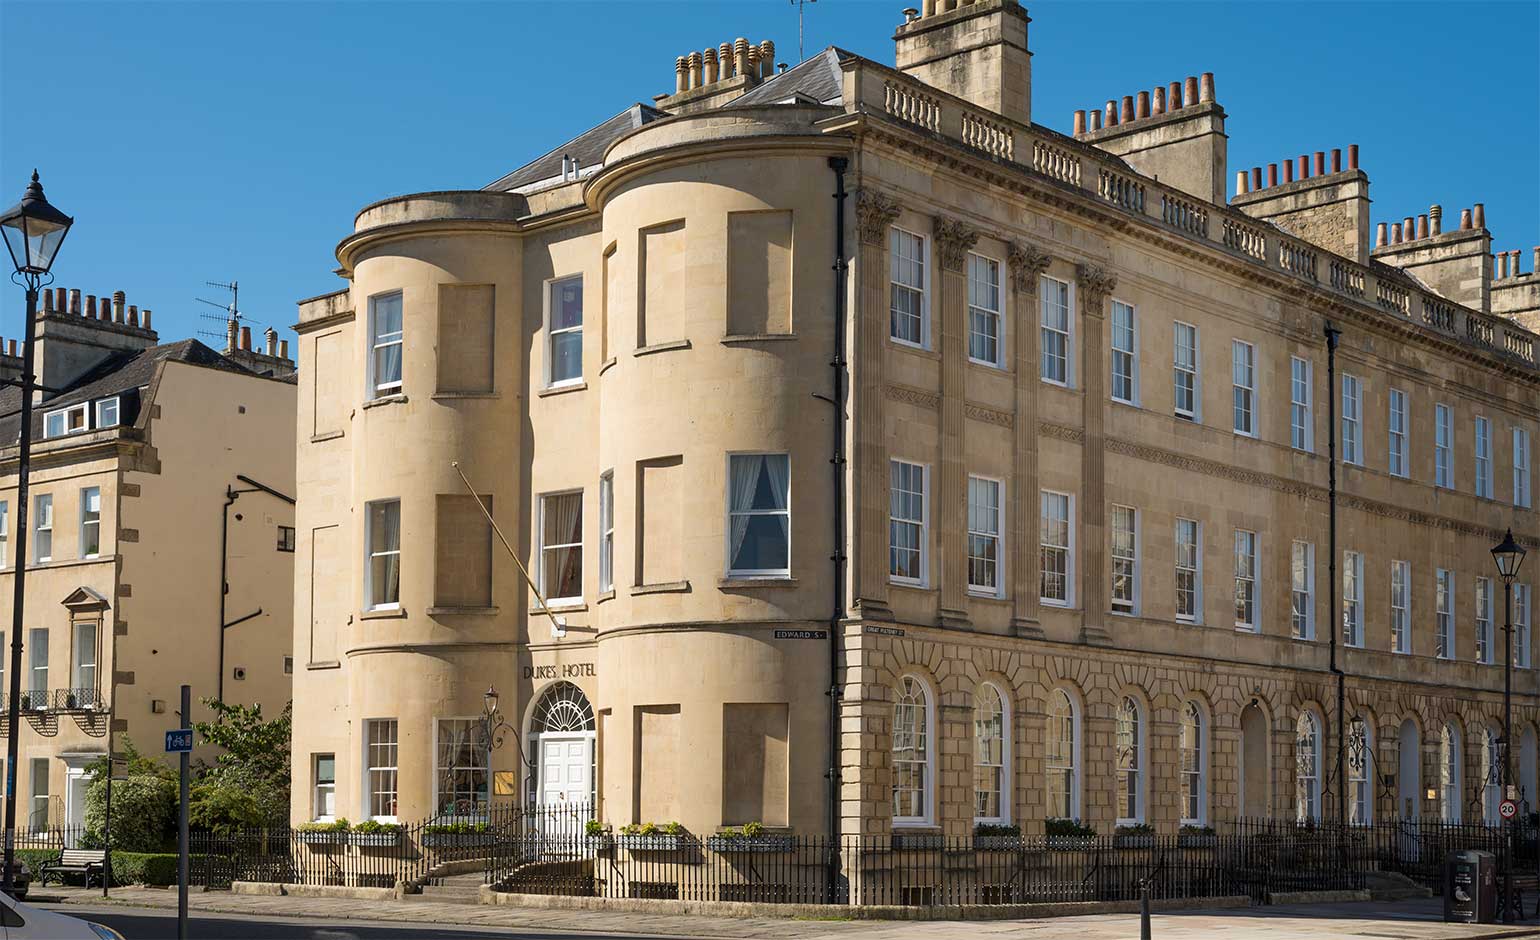 Kaleidoscope Hotels acquires popular hotel on Great Pulteney Street